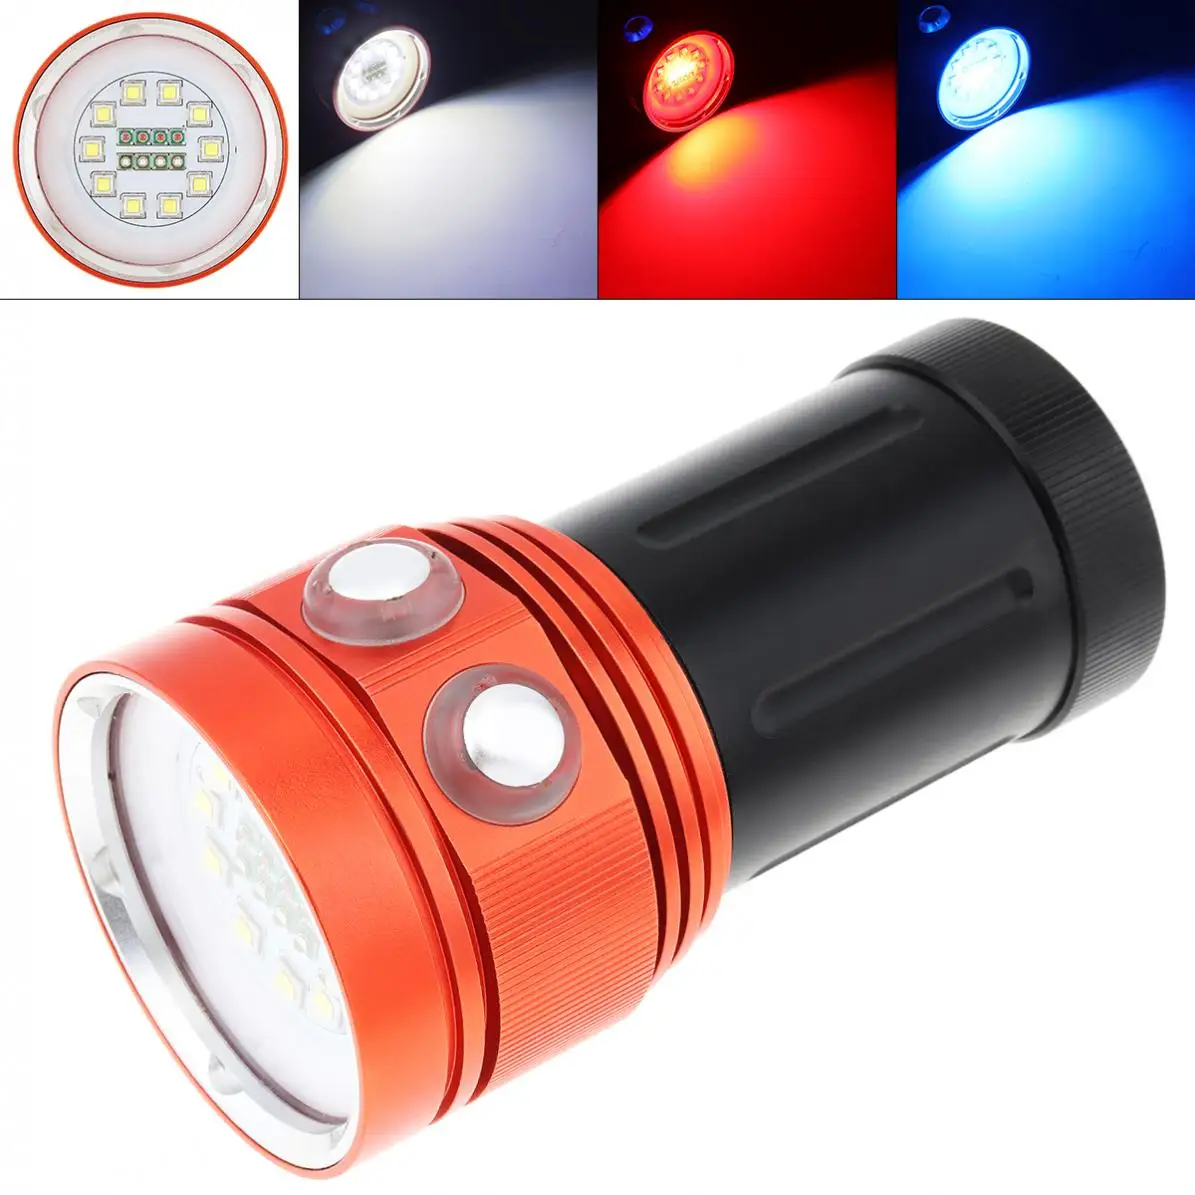 LED Professional Diving Flashlight Support Underwater 100mWaterproof IP68 Powerfull Flashlight for Photography Video Fill Light